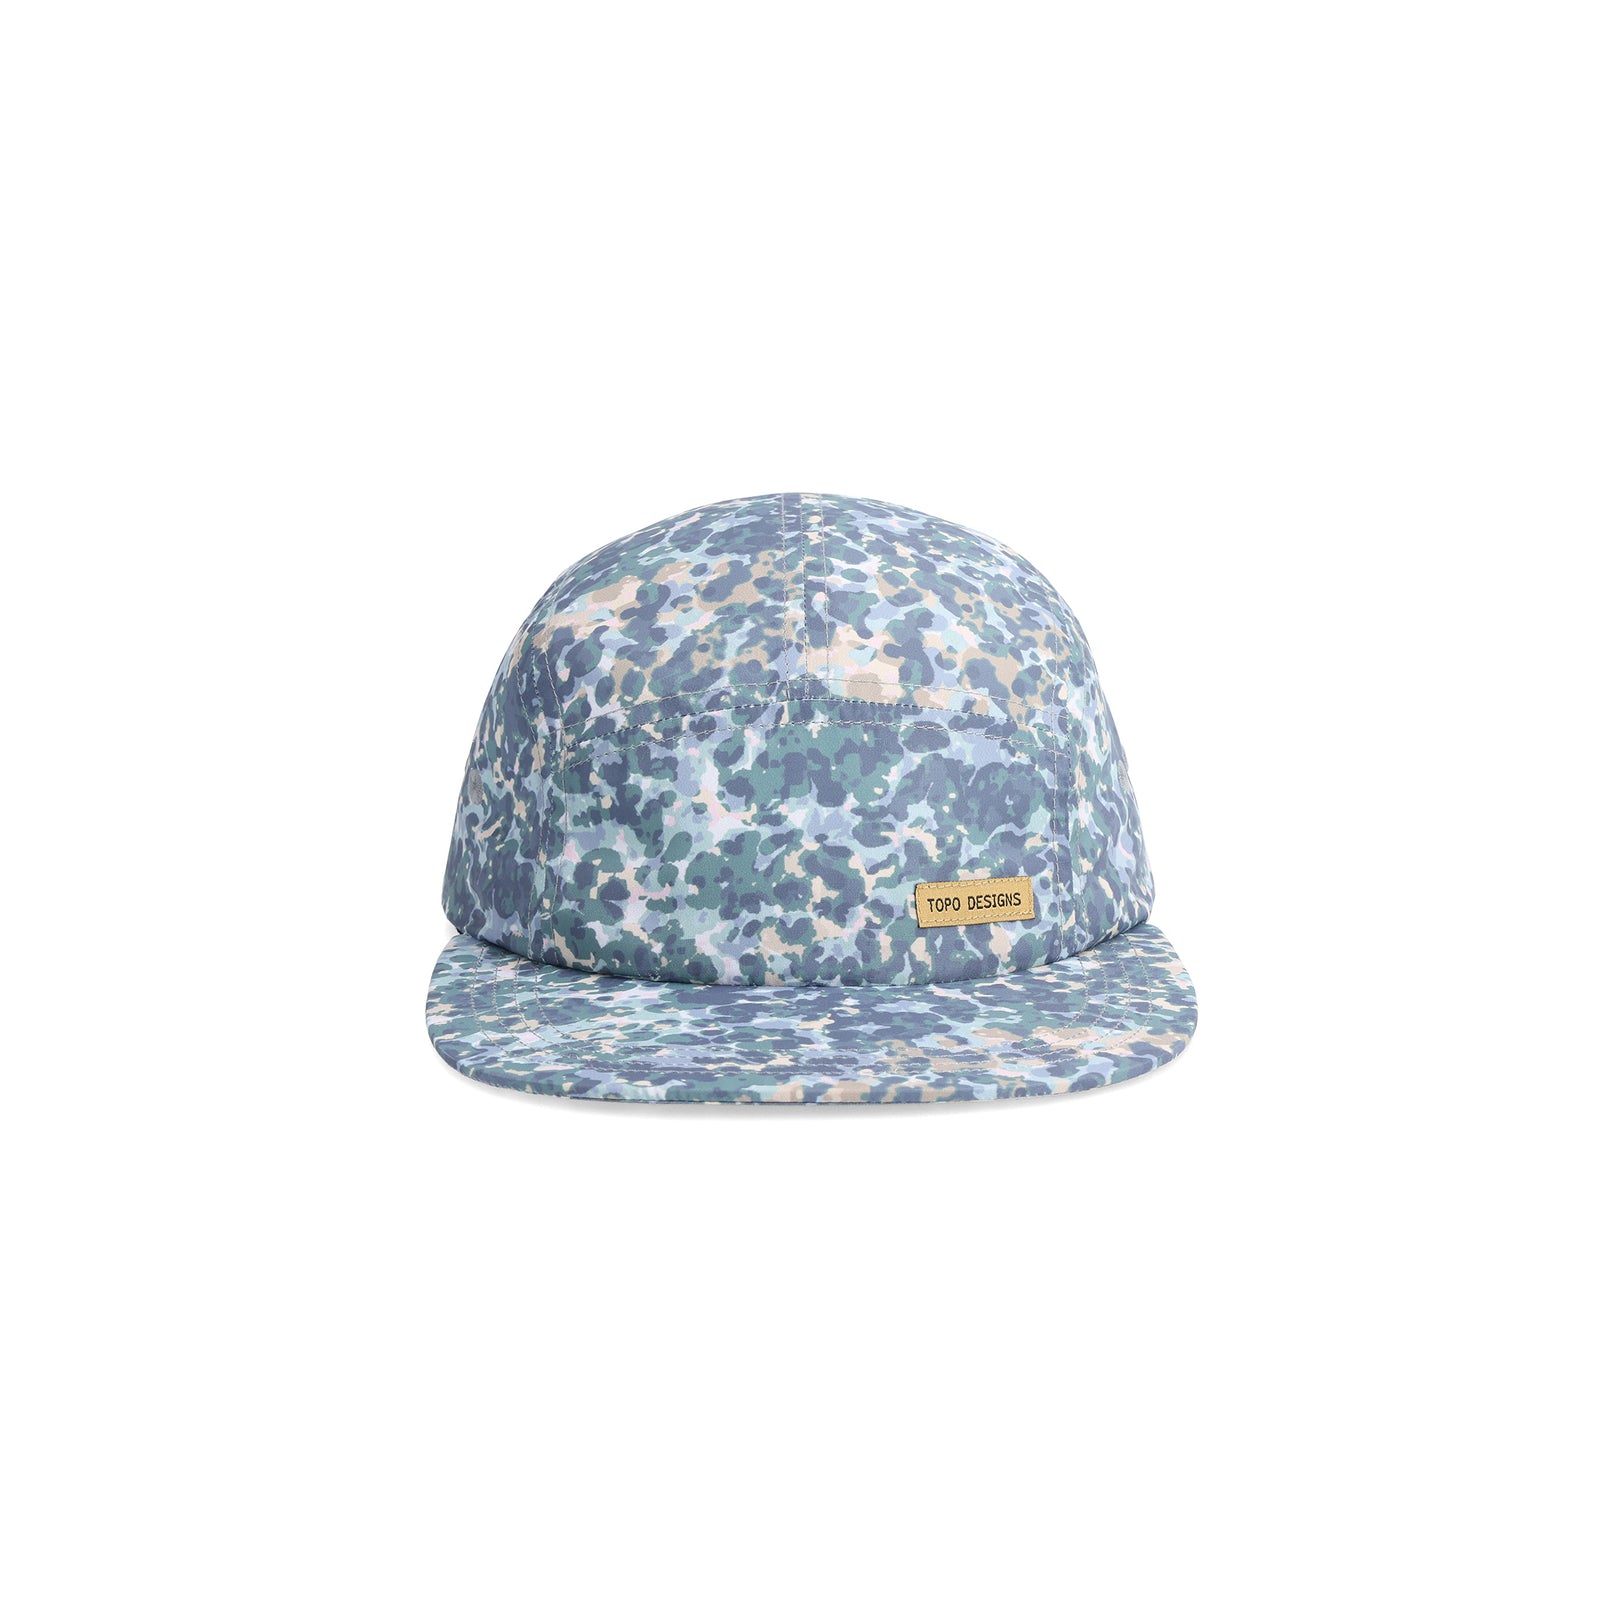 Front View of Topo Designs Nylon Camp Hat in "Slate Meteor"